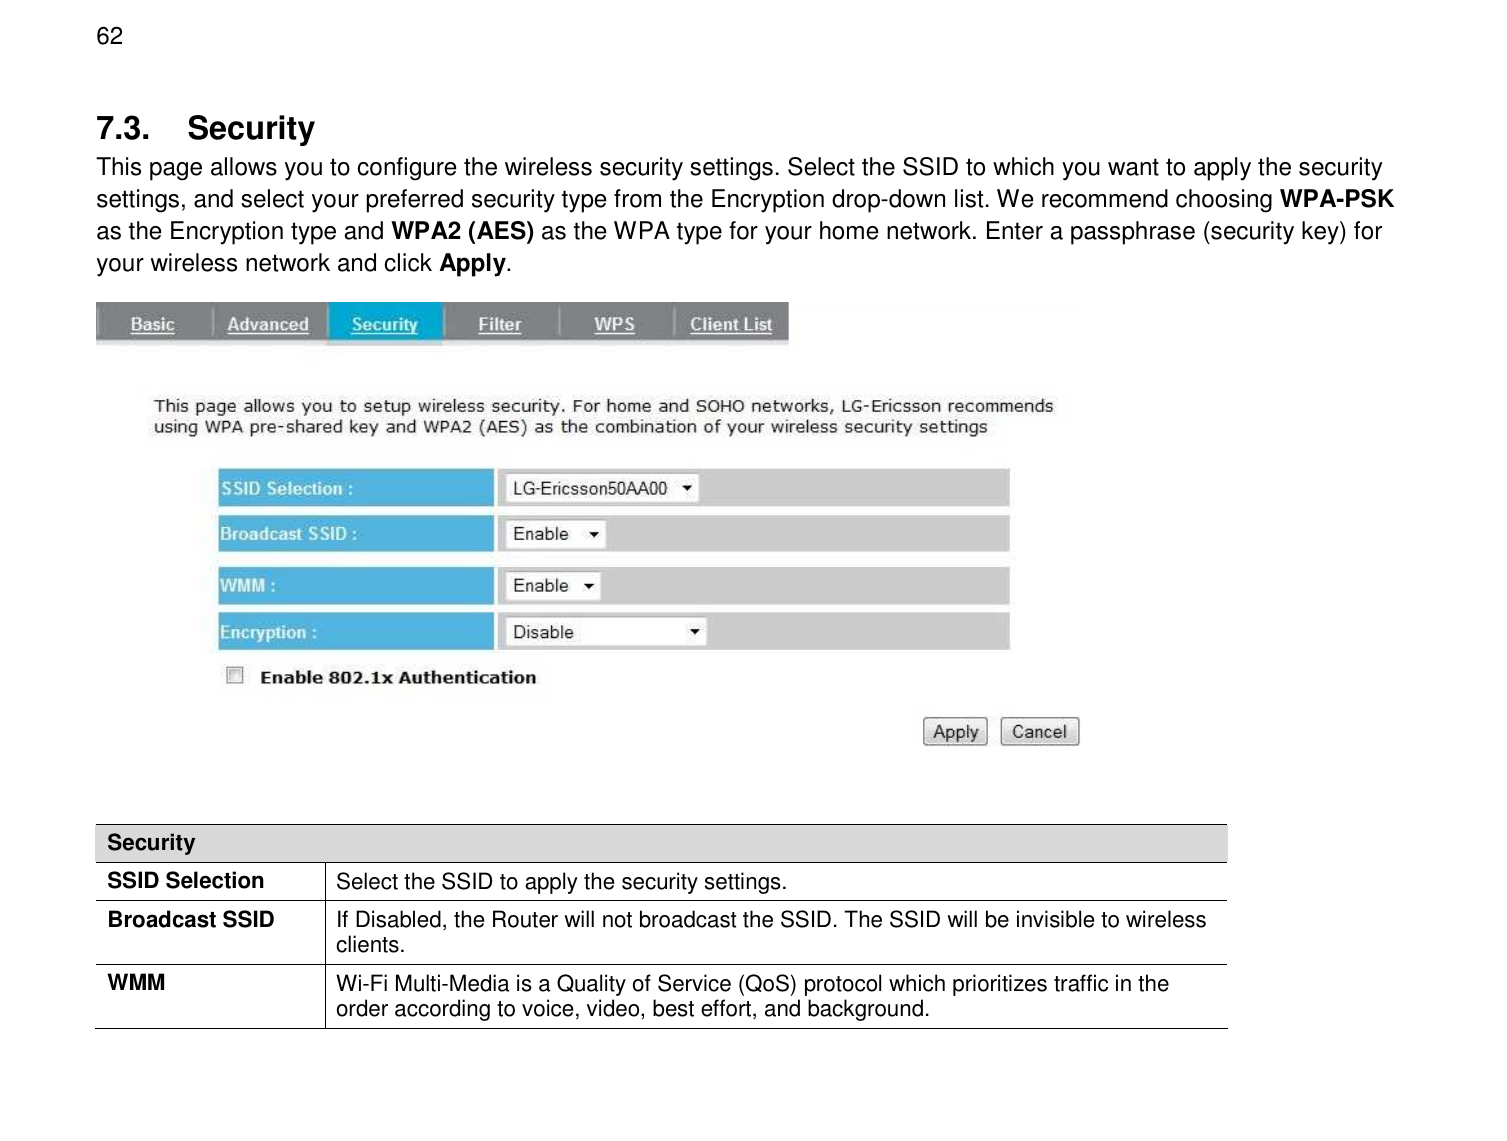  62 7.3.  Security This page allows you to configure the wireless security settings. Select the SSID to which you want to apply the security settings, and select your preferred security type from the Encryption drop-down list. We recommend choosing WPA-PSK as the Encryption type and WPA2 (AES) as the WPA type for your home network. Enter a passphrase (security key) for your wireless network and click Apply.   Security SSID Selection  Select the SSID to apply the security settings. Broadcast SSID  If Disabled, the Router will not broadcast the SSID. The SSID will be invisible to wireless clients. WMM  Wi-Fi Multi-Media is a Quality of Service (QoS) protocol which prioritizes traffic in the order according to voice, video, best effort, and background. 